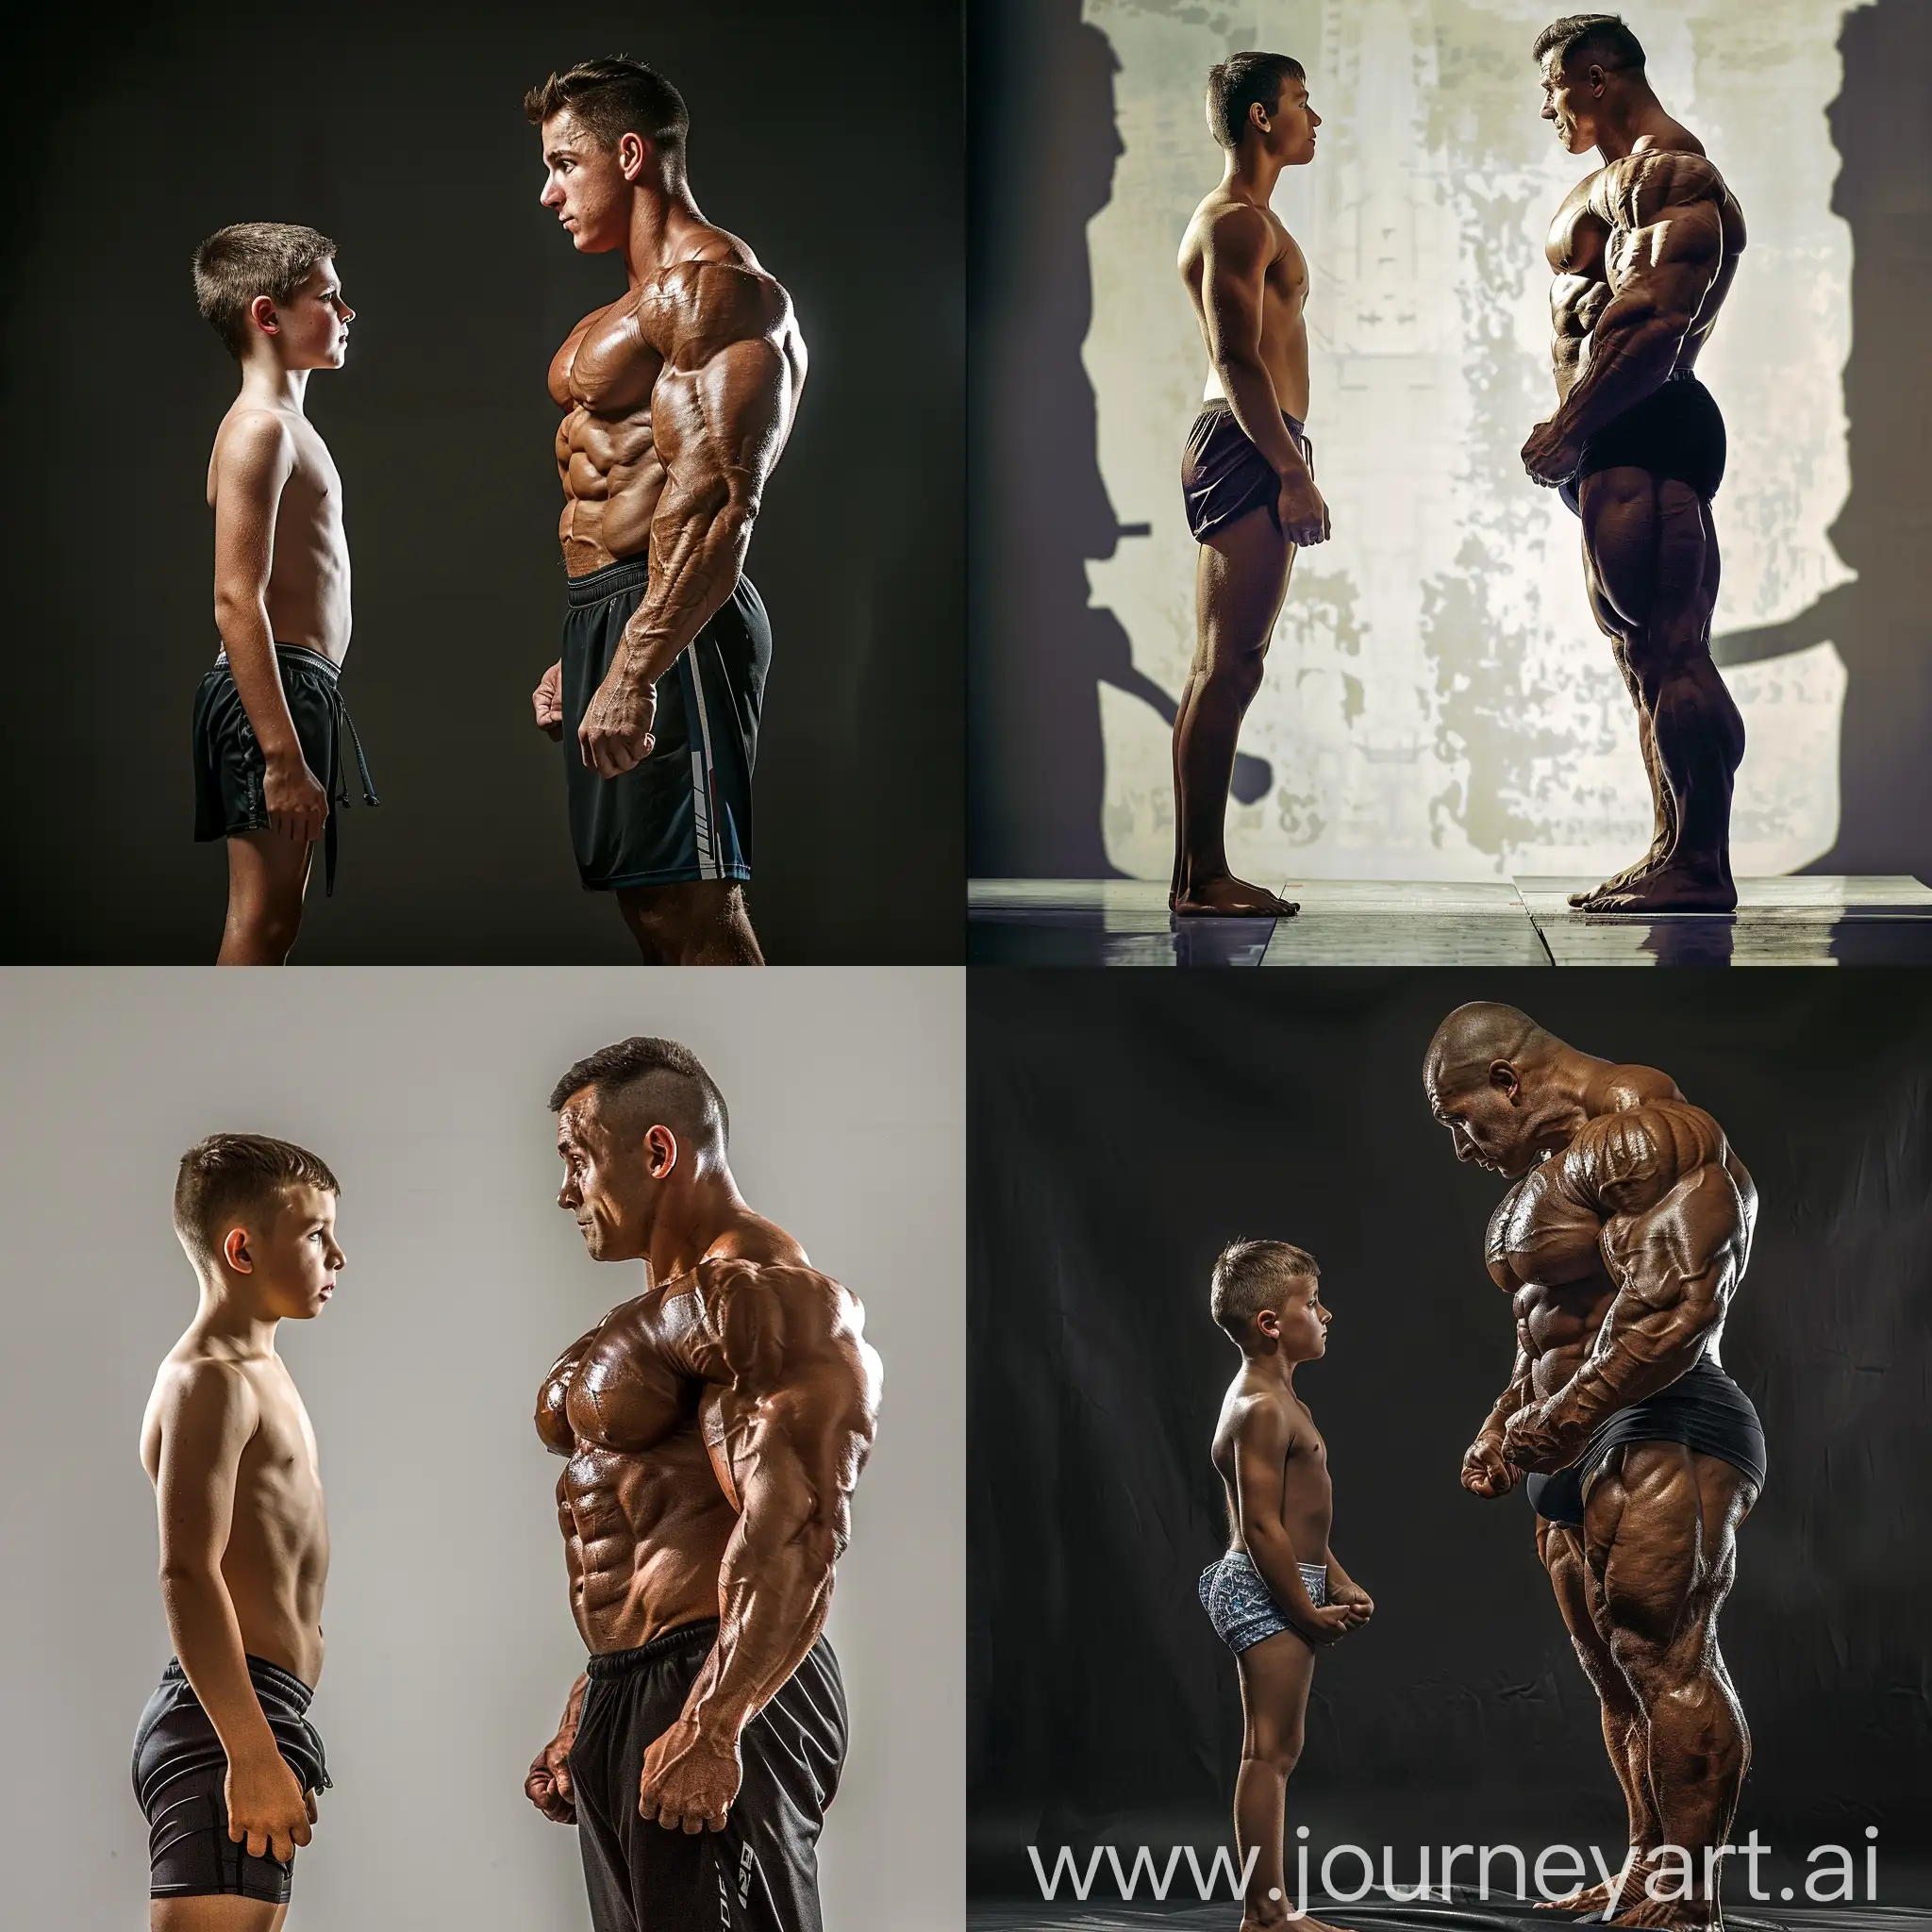 Sibling-Physique-Comparison-Younger-Brother-vs-Professional-Bodybuilder